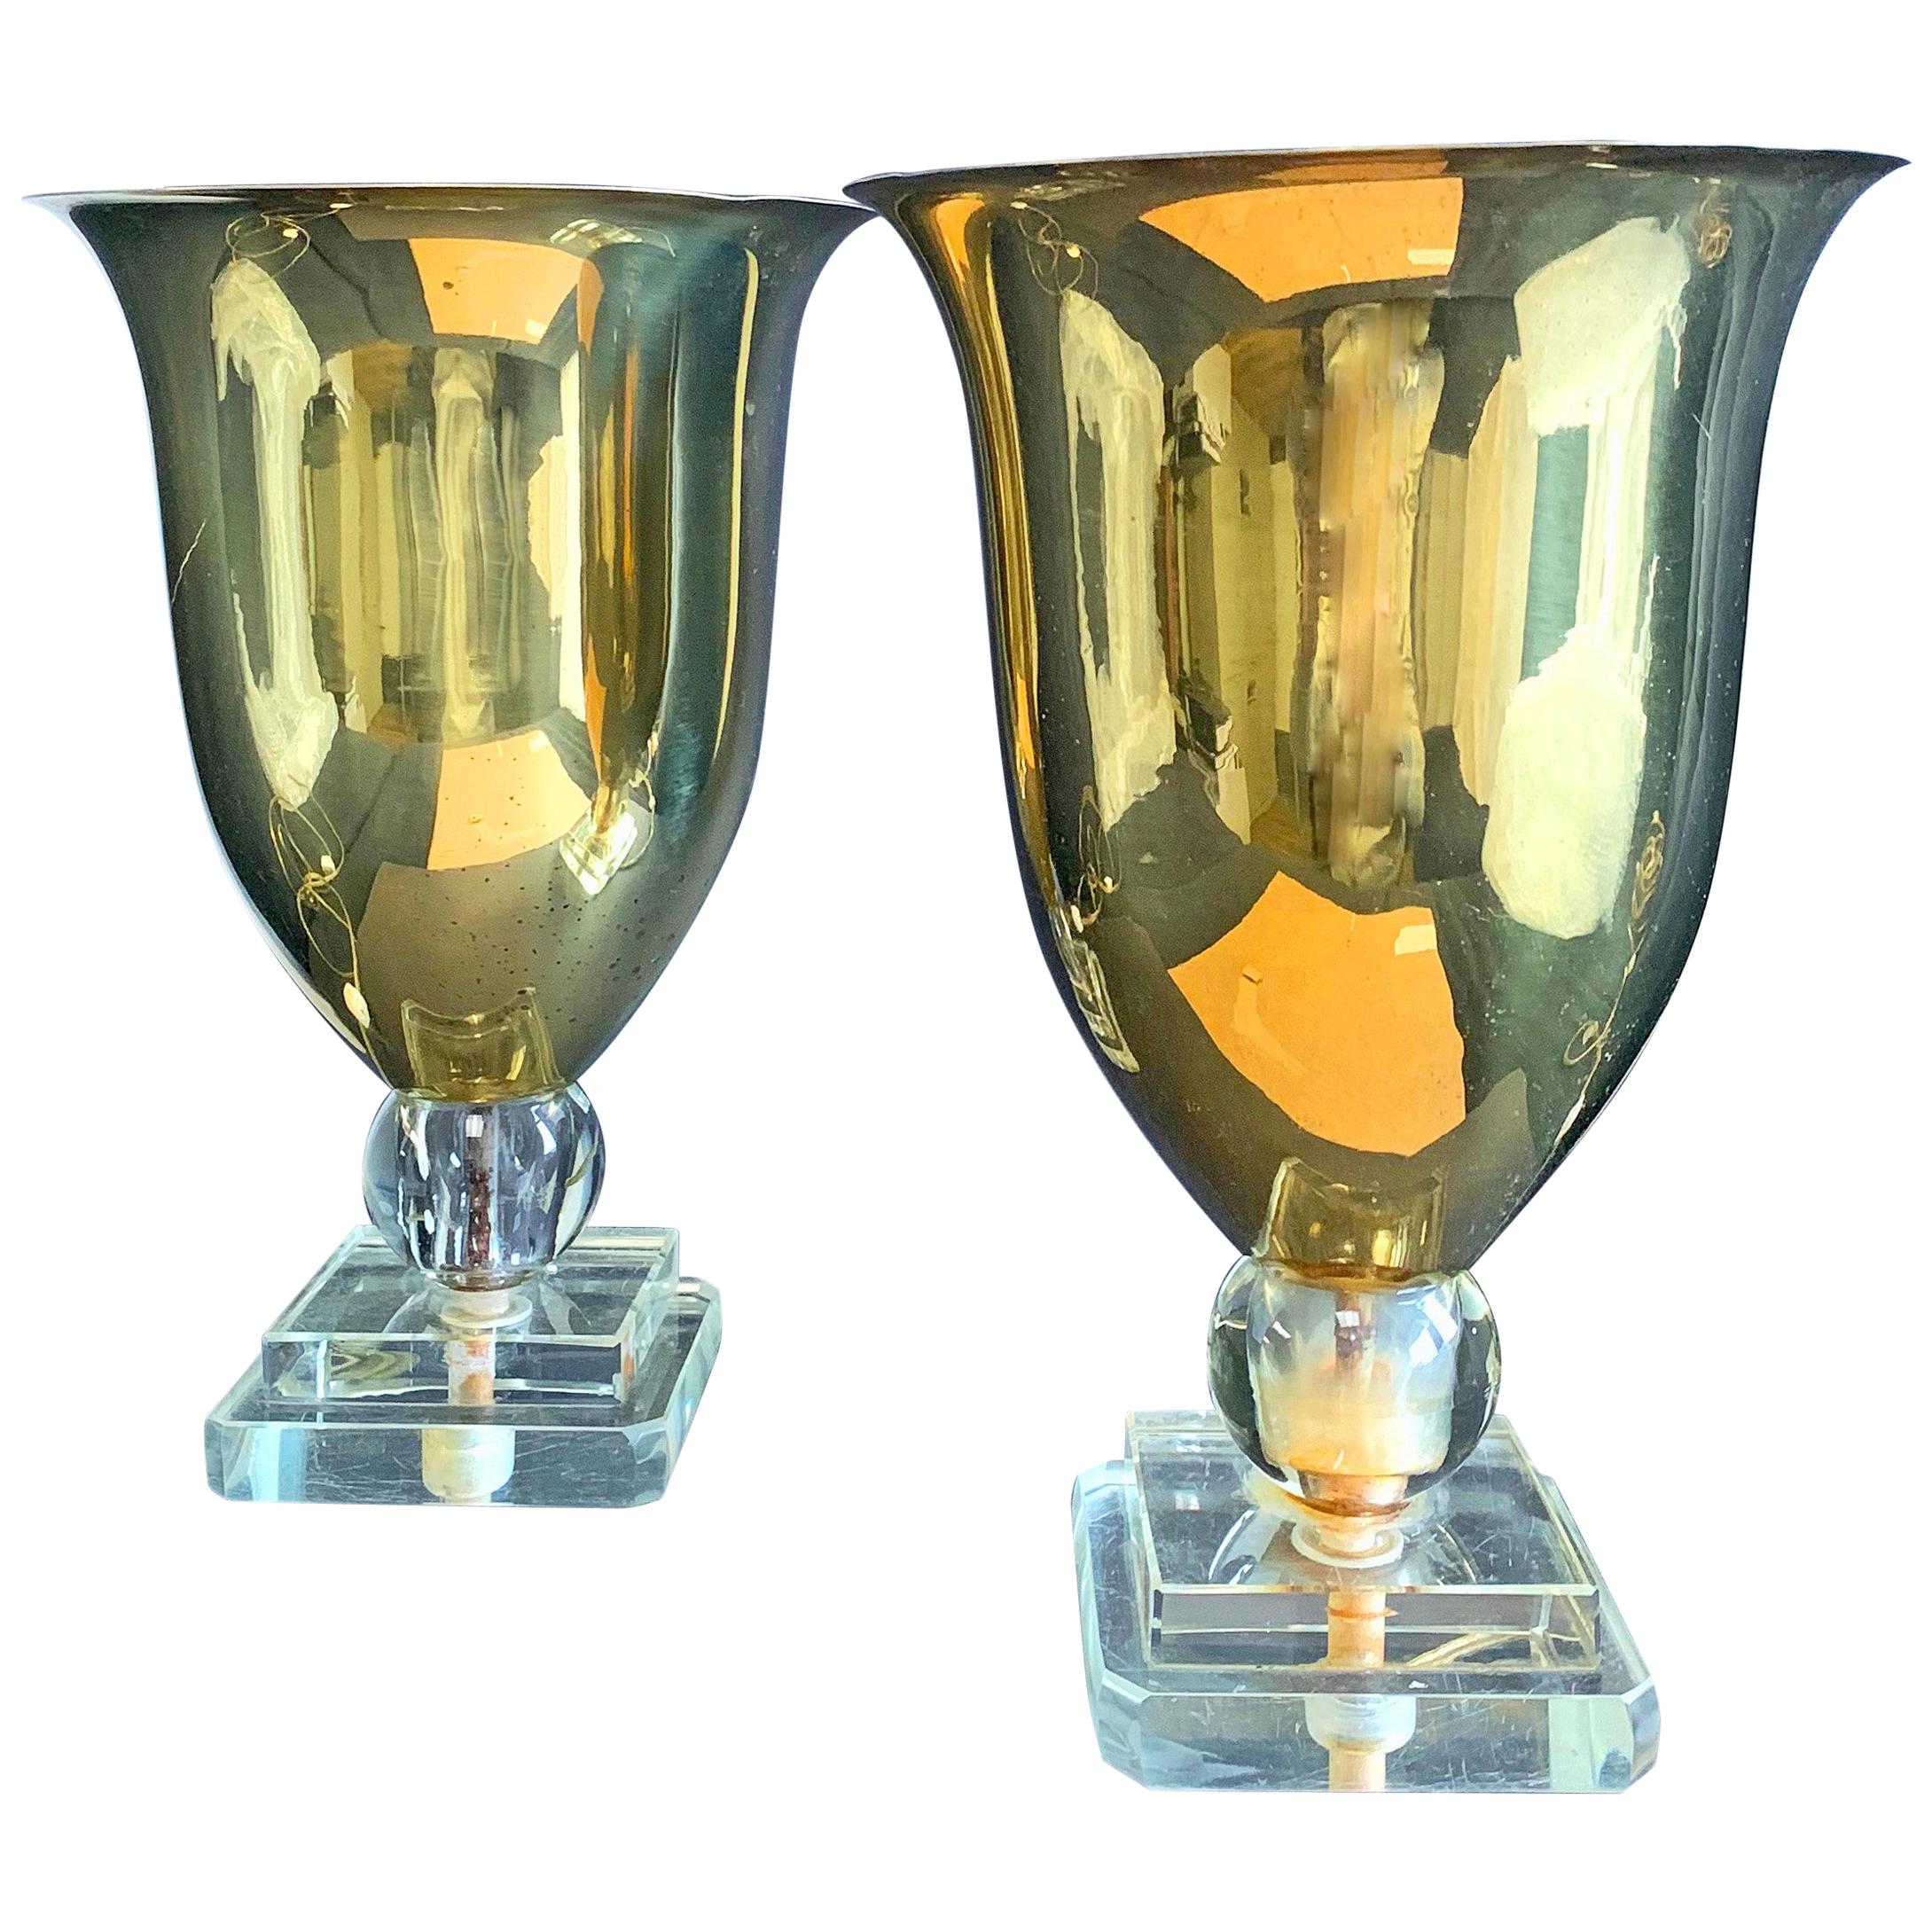 Pair of Rare Art Deco Table Torcheres, Brass, Glass and Lucite